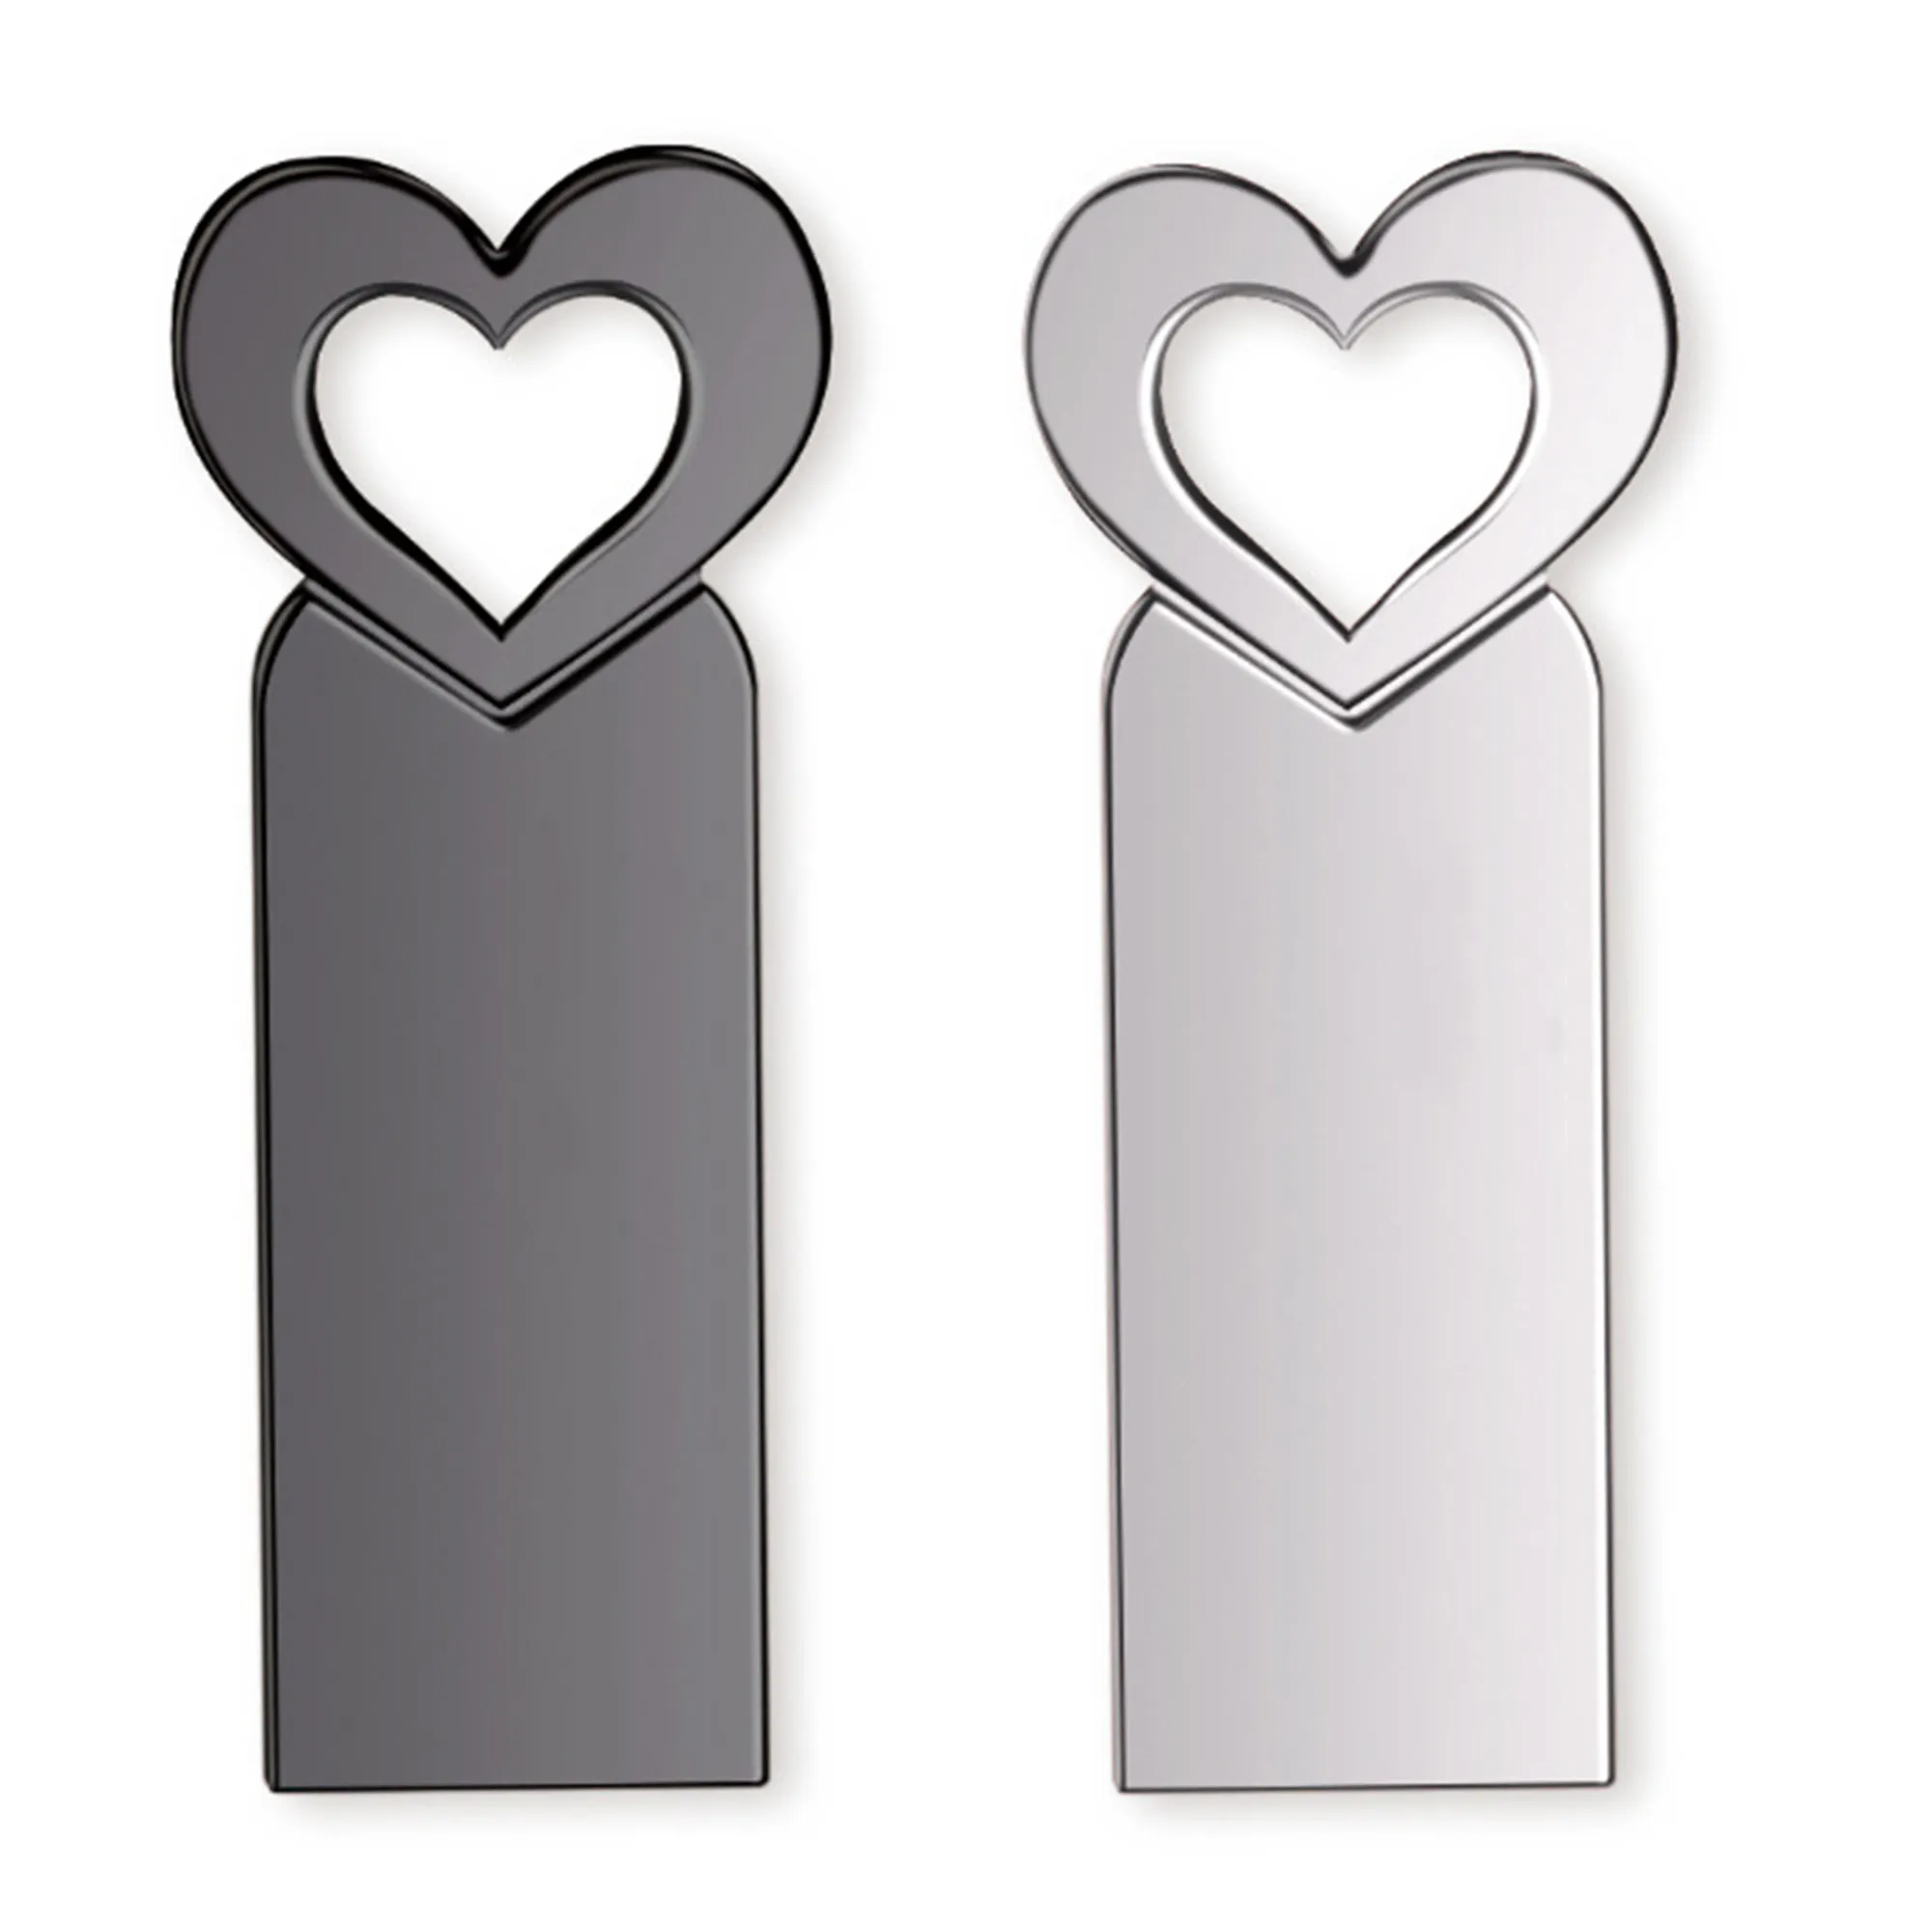 WES Small Metal USB Flash Drive Heart-Shaped USB 2.0 Thumb Drive 4GB-64GB Storage and Backup New USB Stick for You